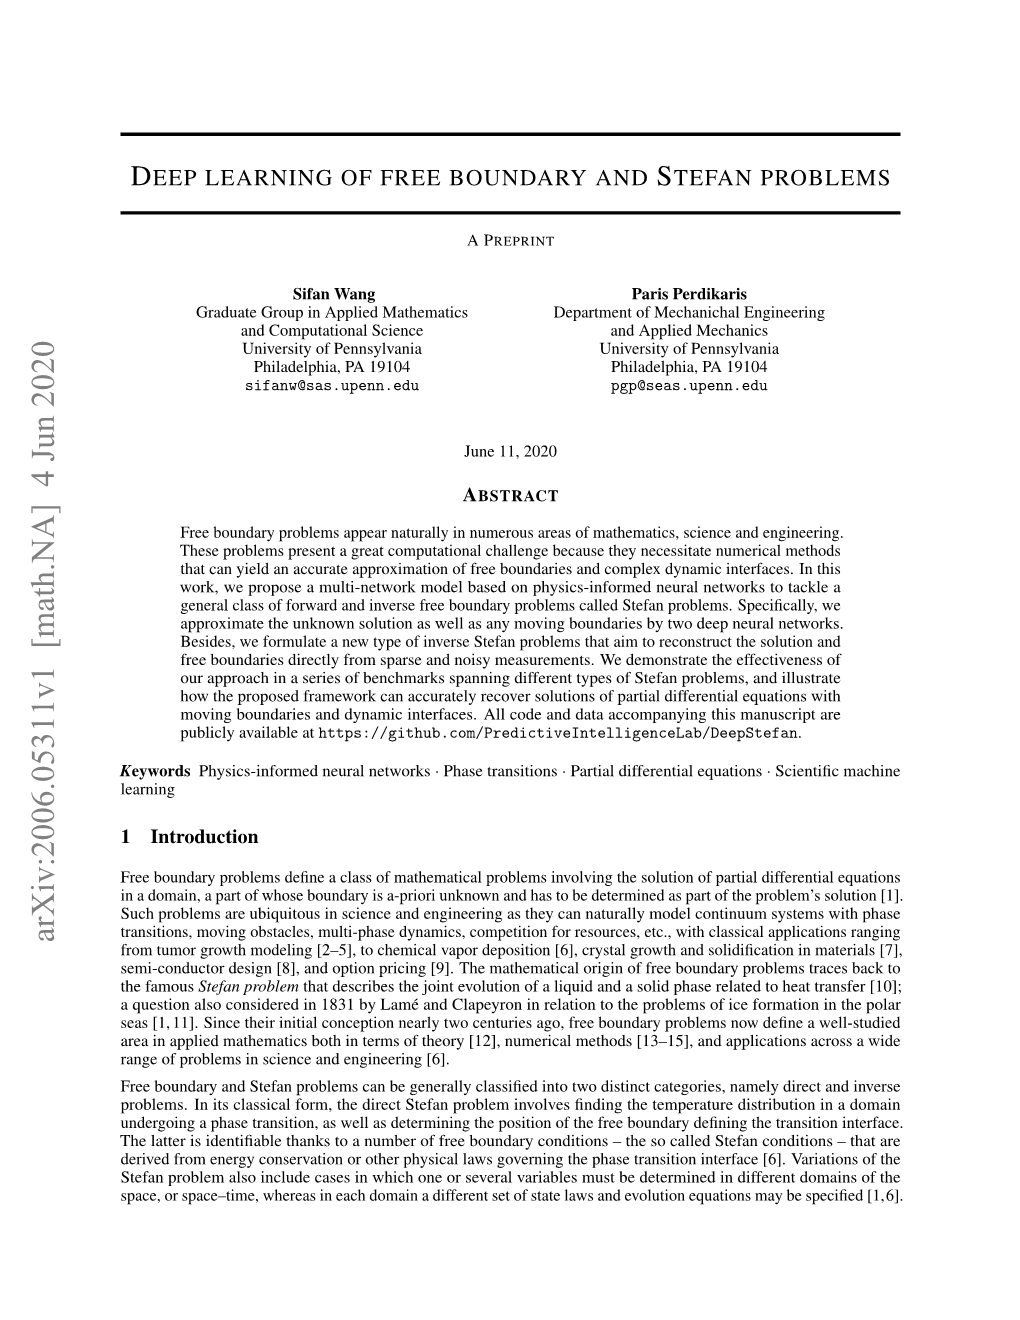 Deep Learning of Free Boundary and Stefan Problems